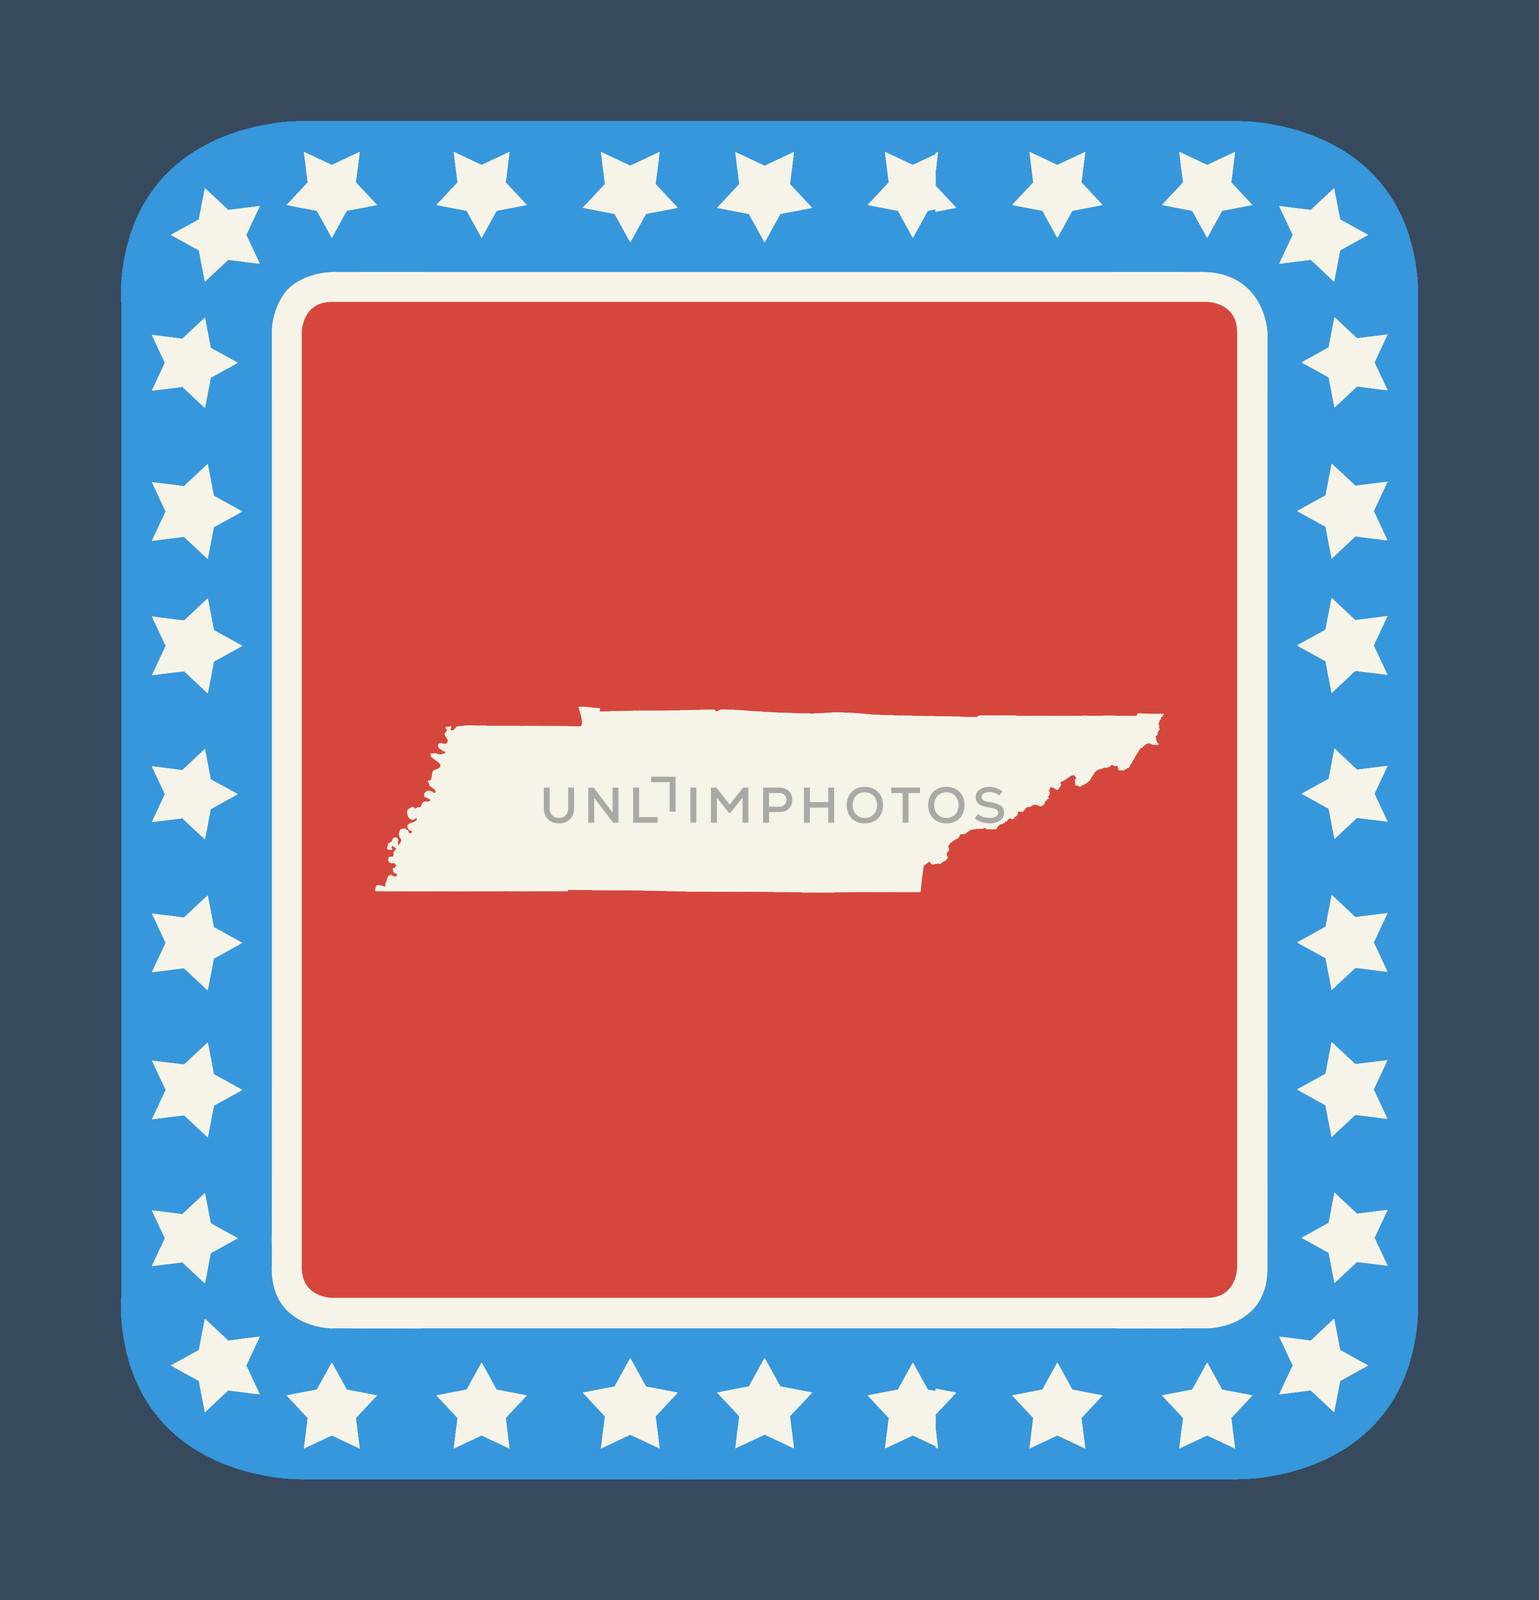 Tennessee state button on American flag in flat web design style, isolated on white background.